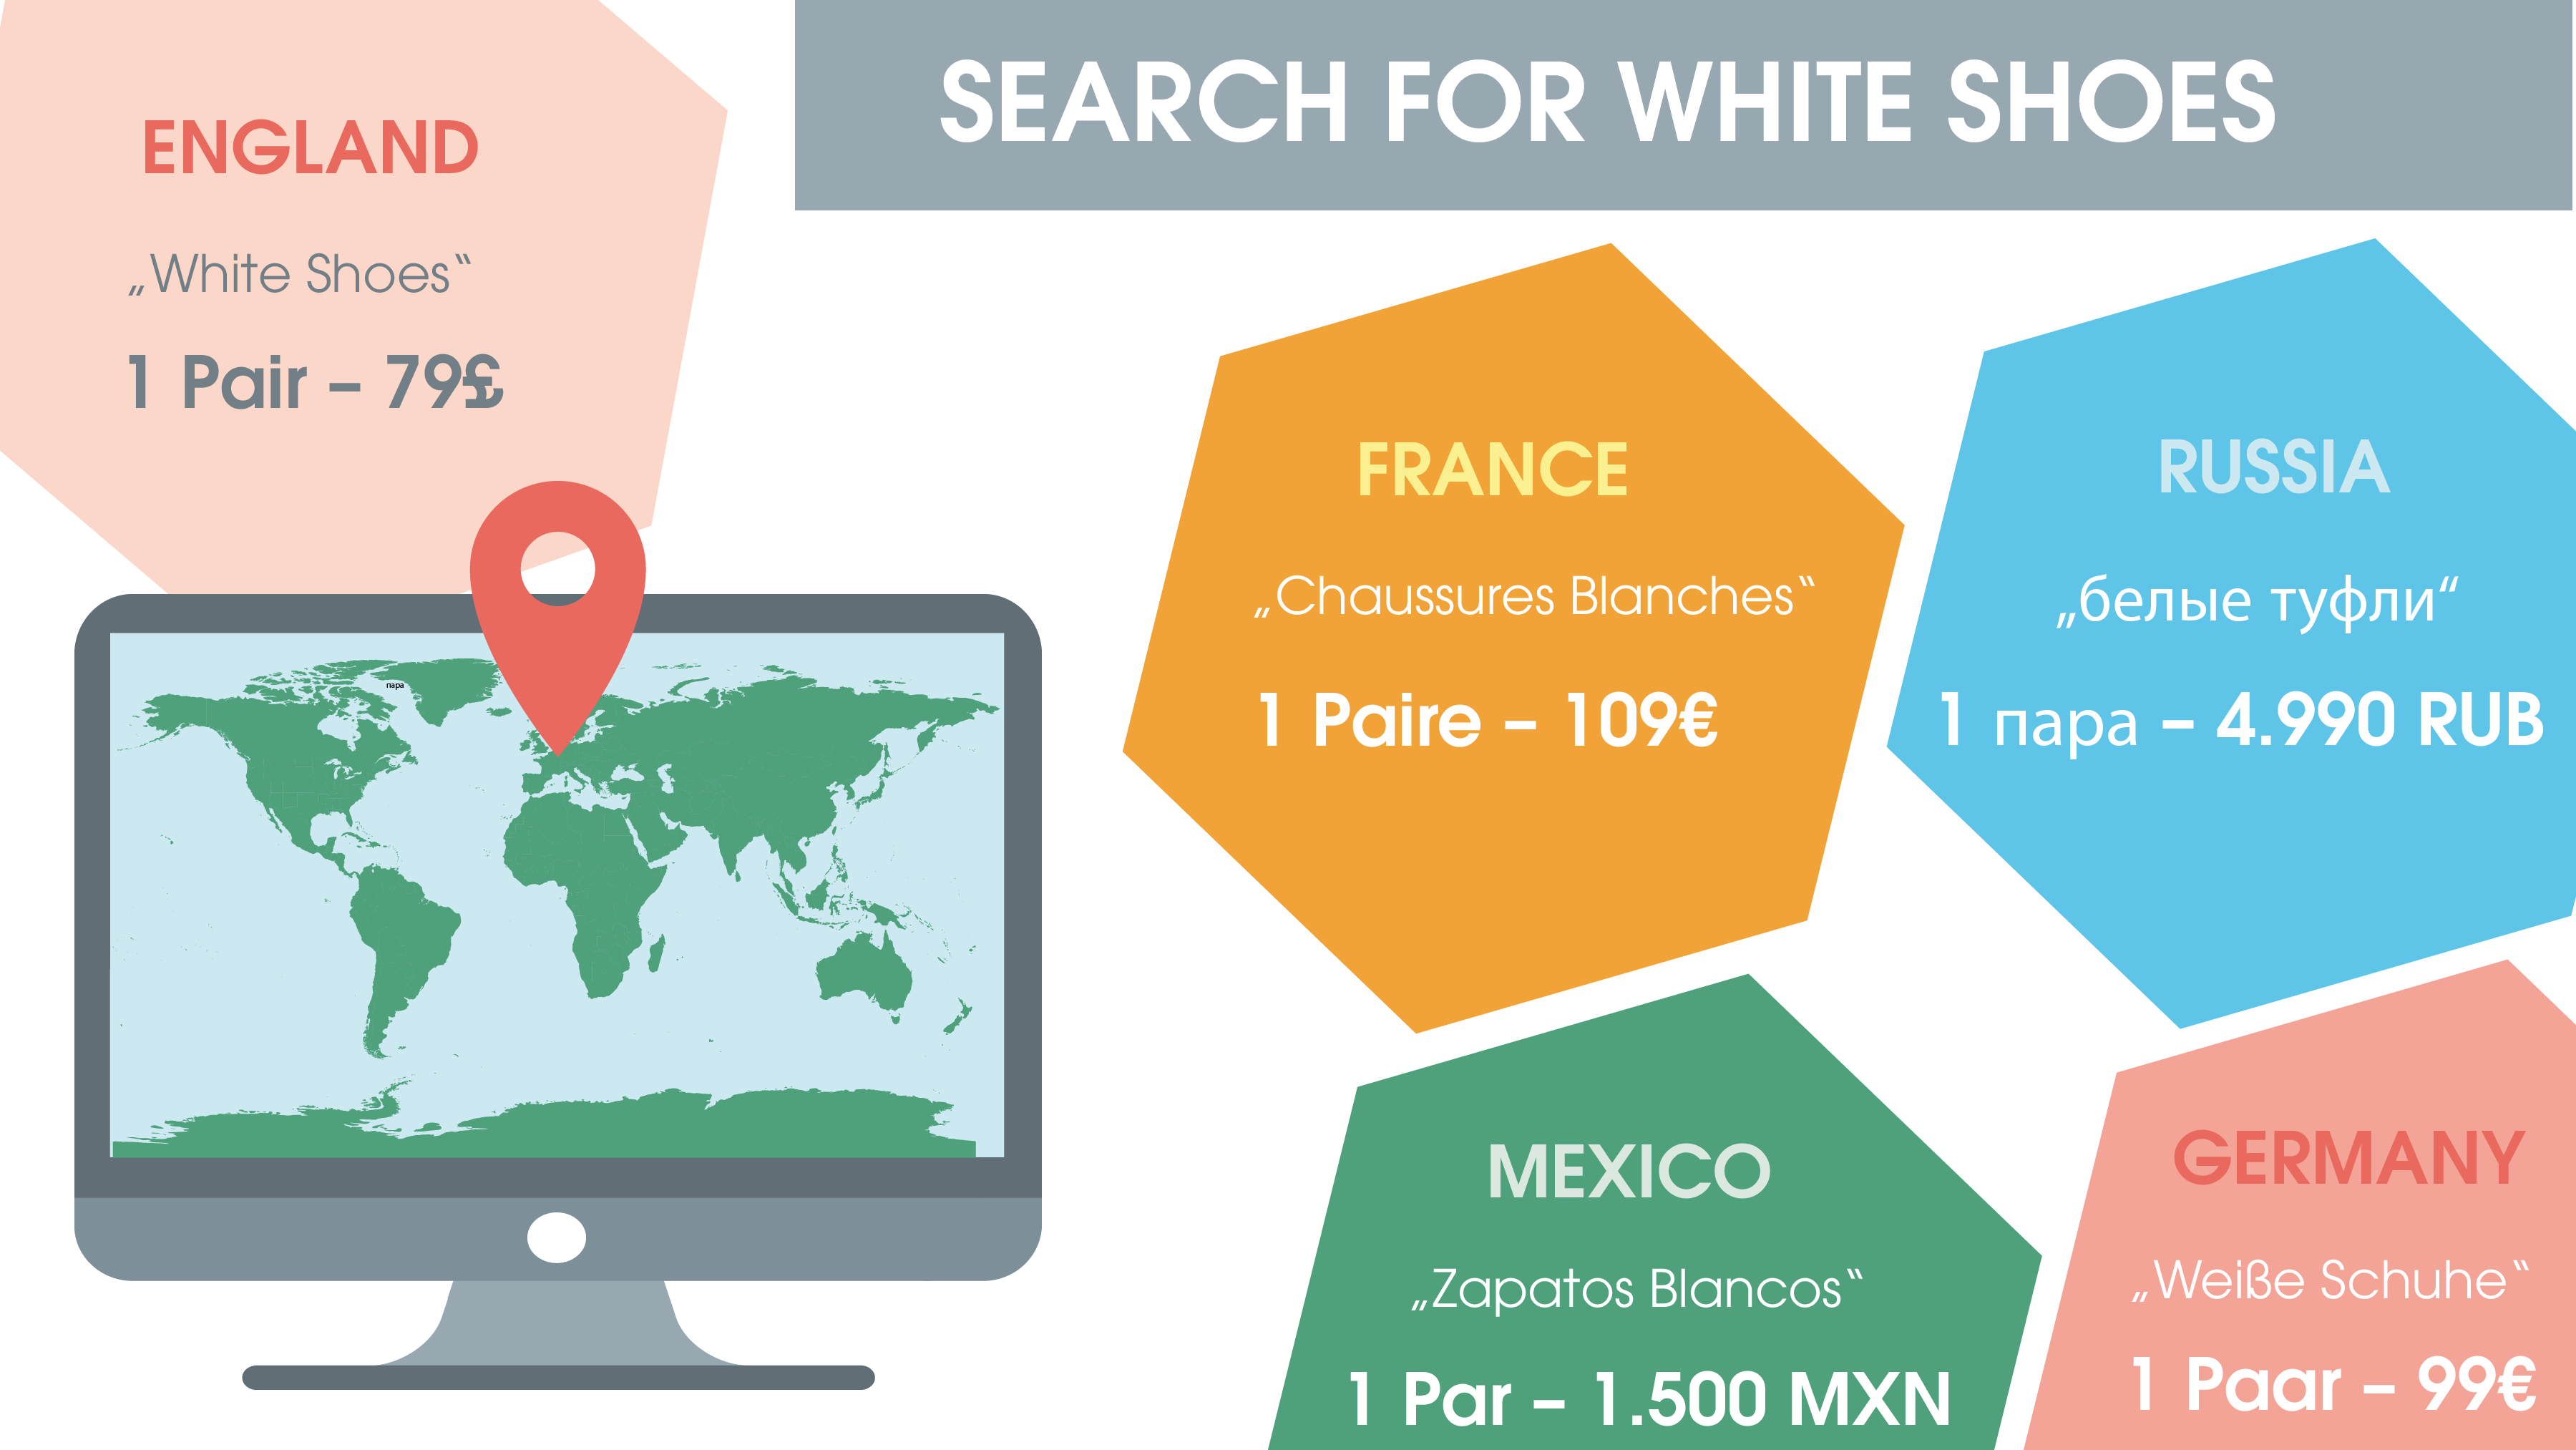 An example of an international search for white shoes is shown. In addition to different languages, different currencies, etc. must also be considered when internationalizing an online store.